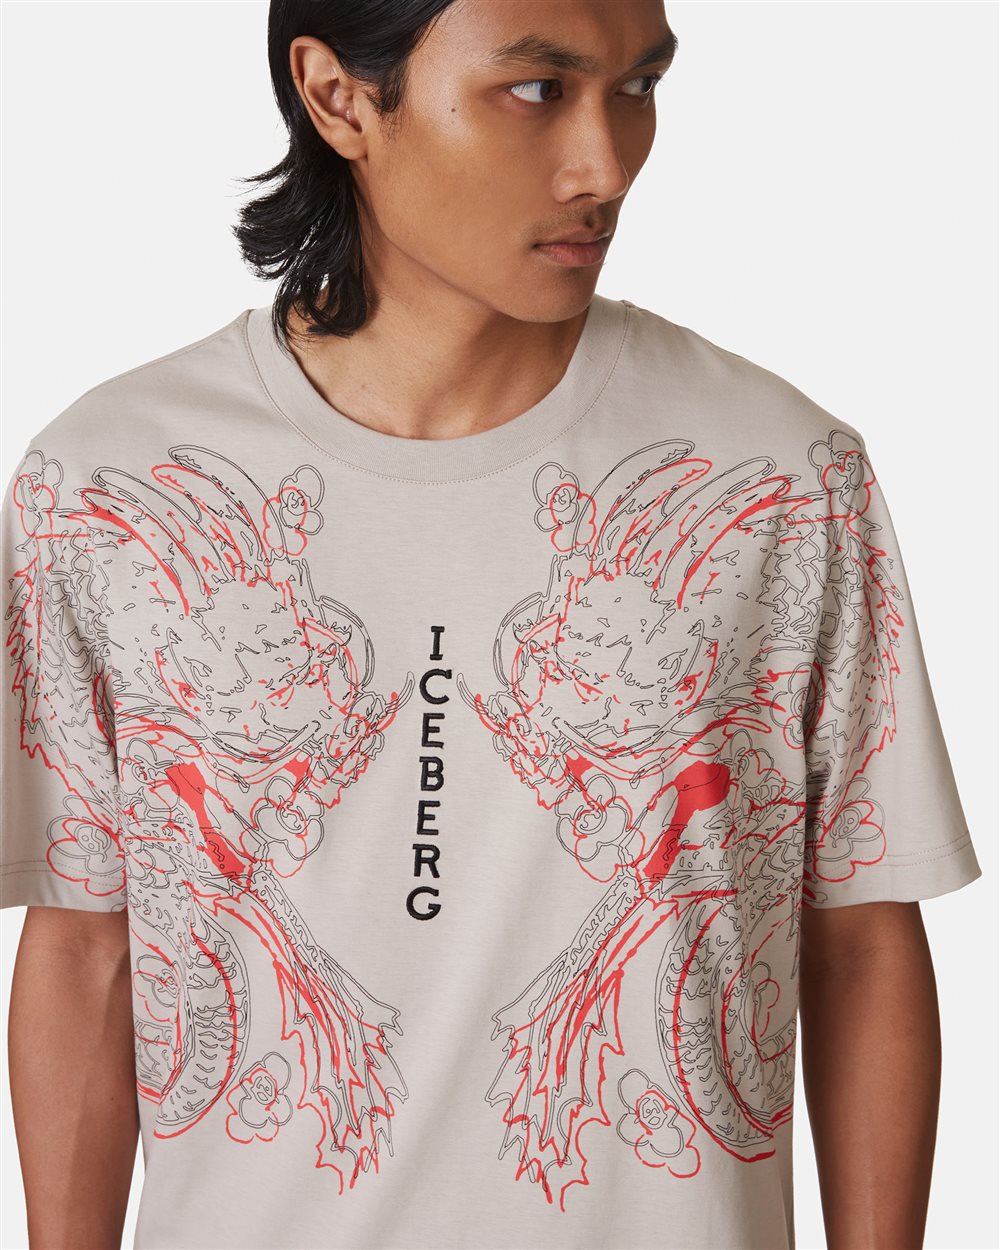 T-shirt with Asian graphics and logo - Iceberg - Official Website